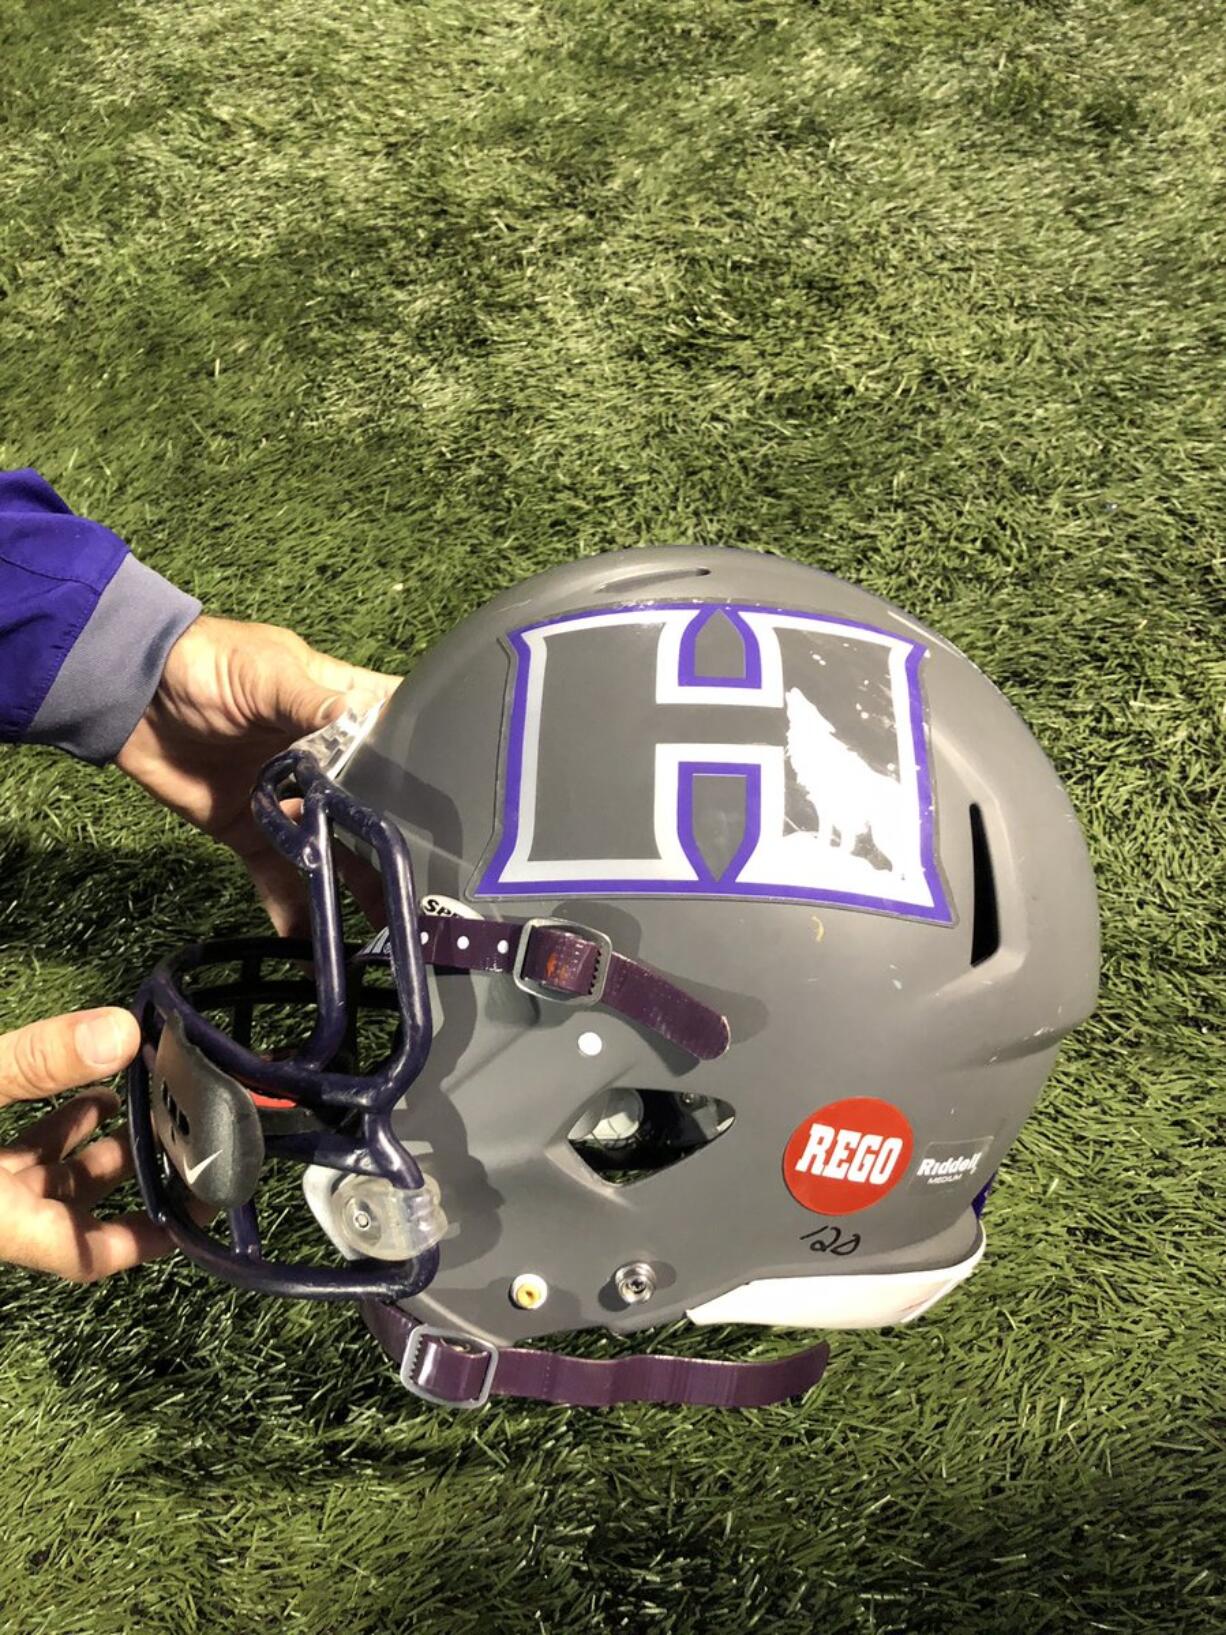 Heritage football players wore a red sticker that read "Rego" in its game against Union on Thursday at McKenzie Stadium to honor the life of recently deceased Titans assistant coach Mark Rego.